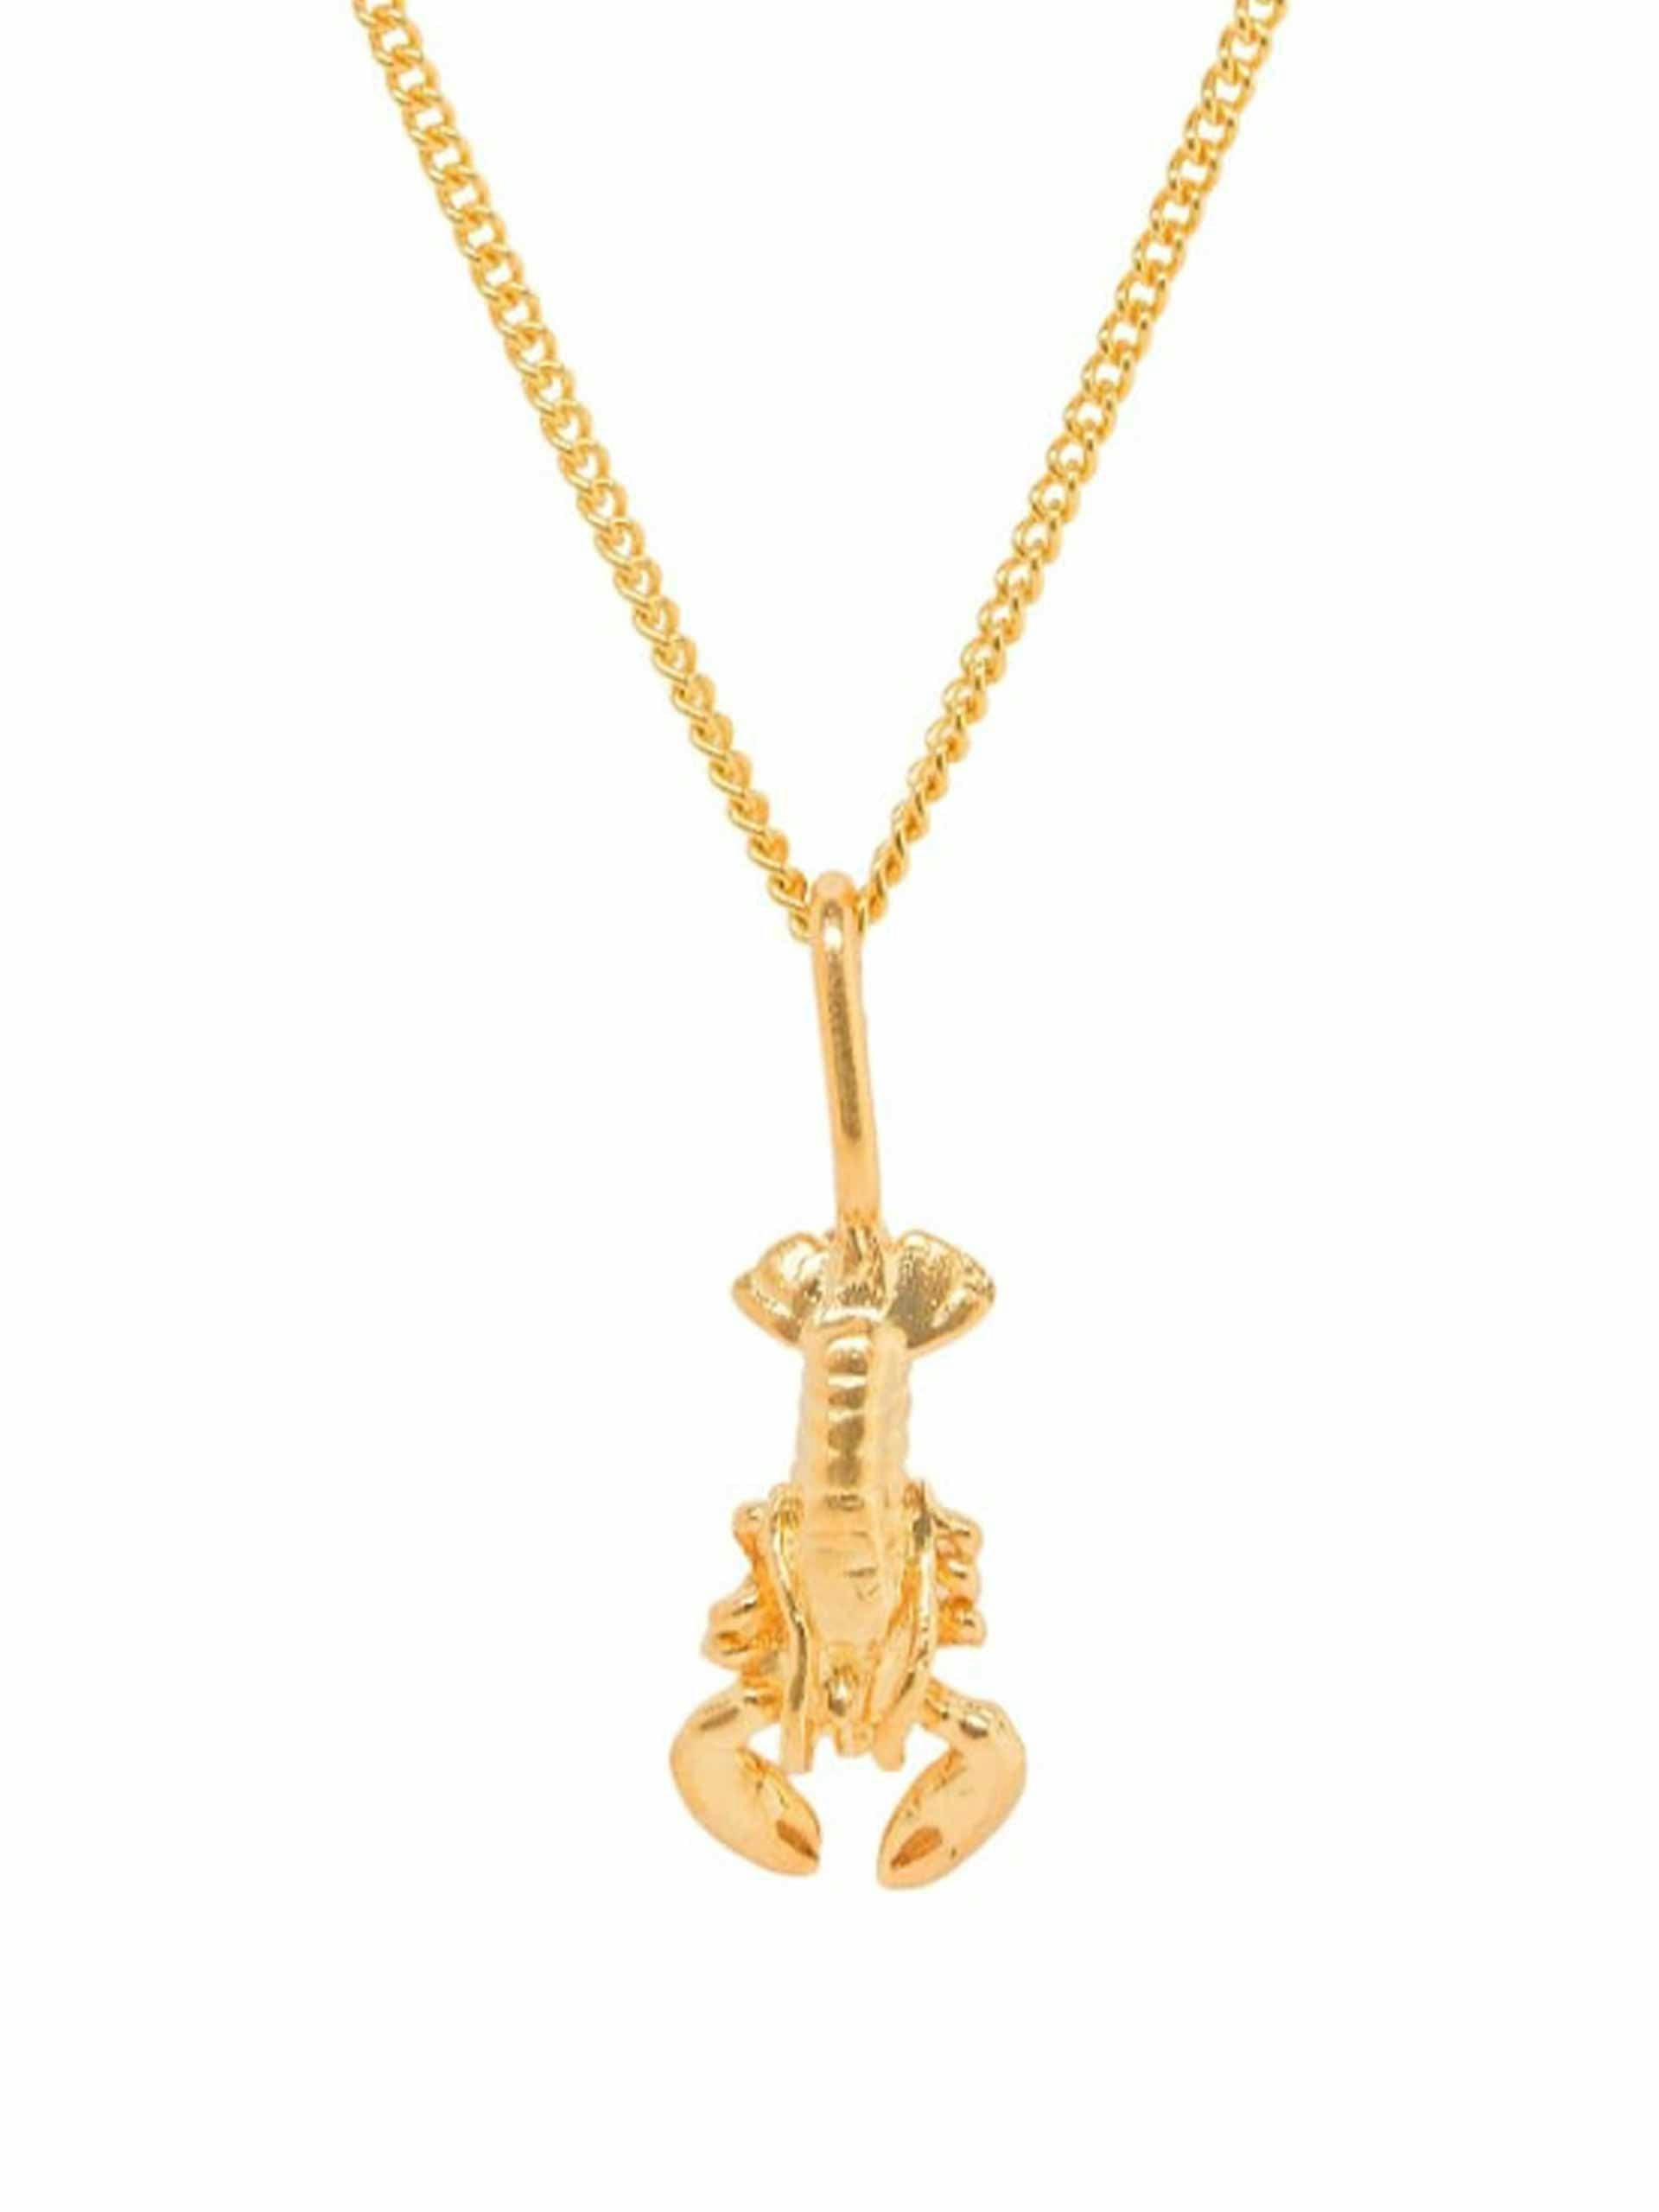 Gold plated lobster necklace